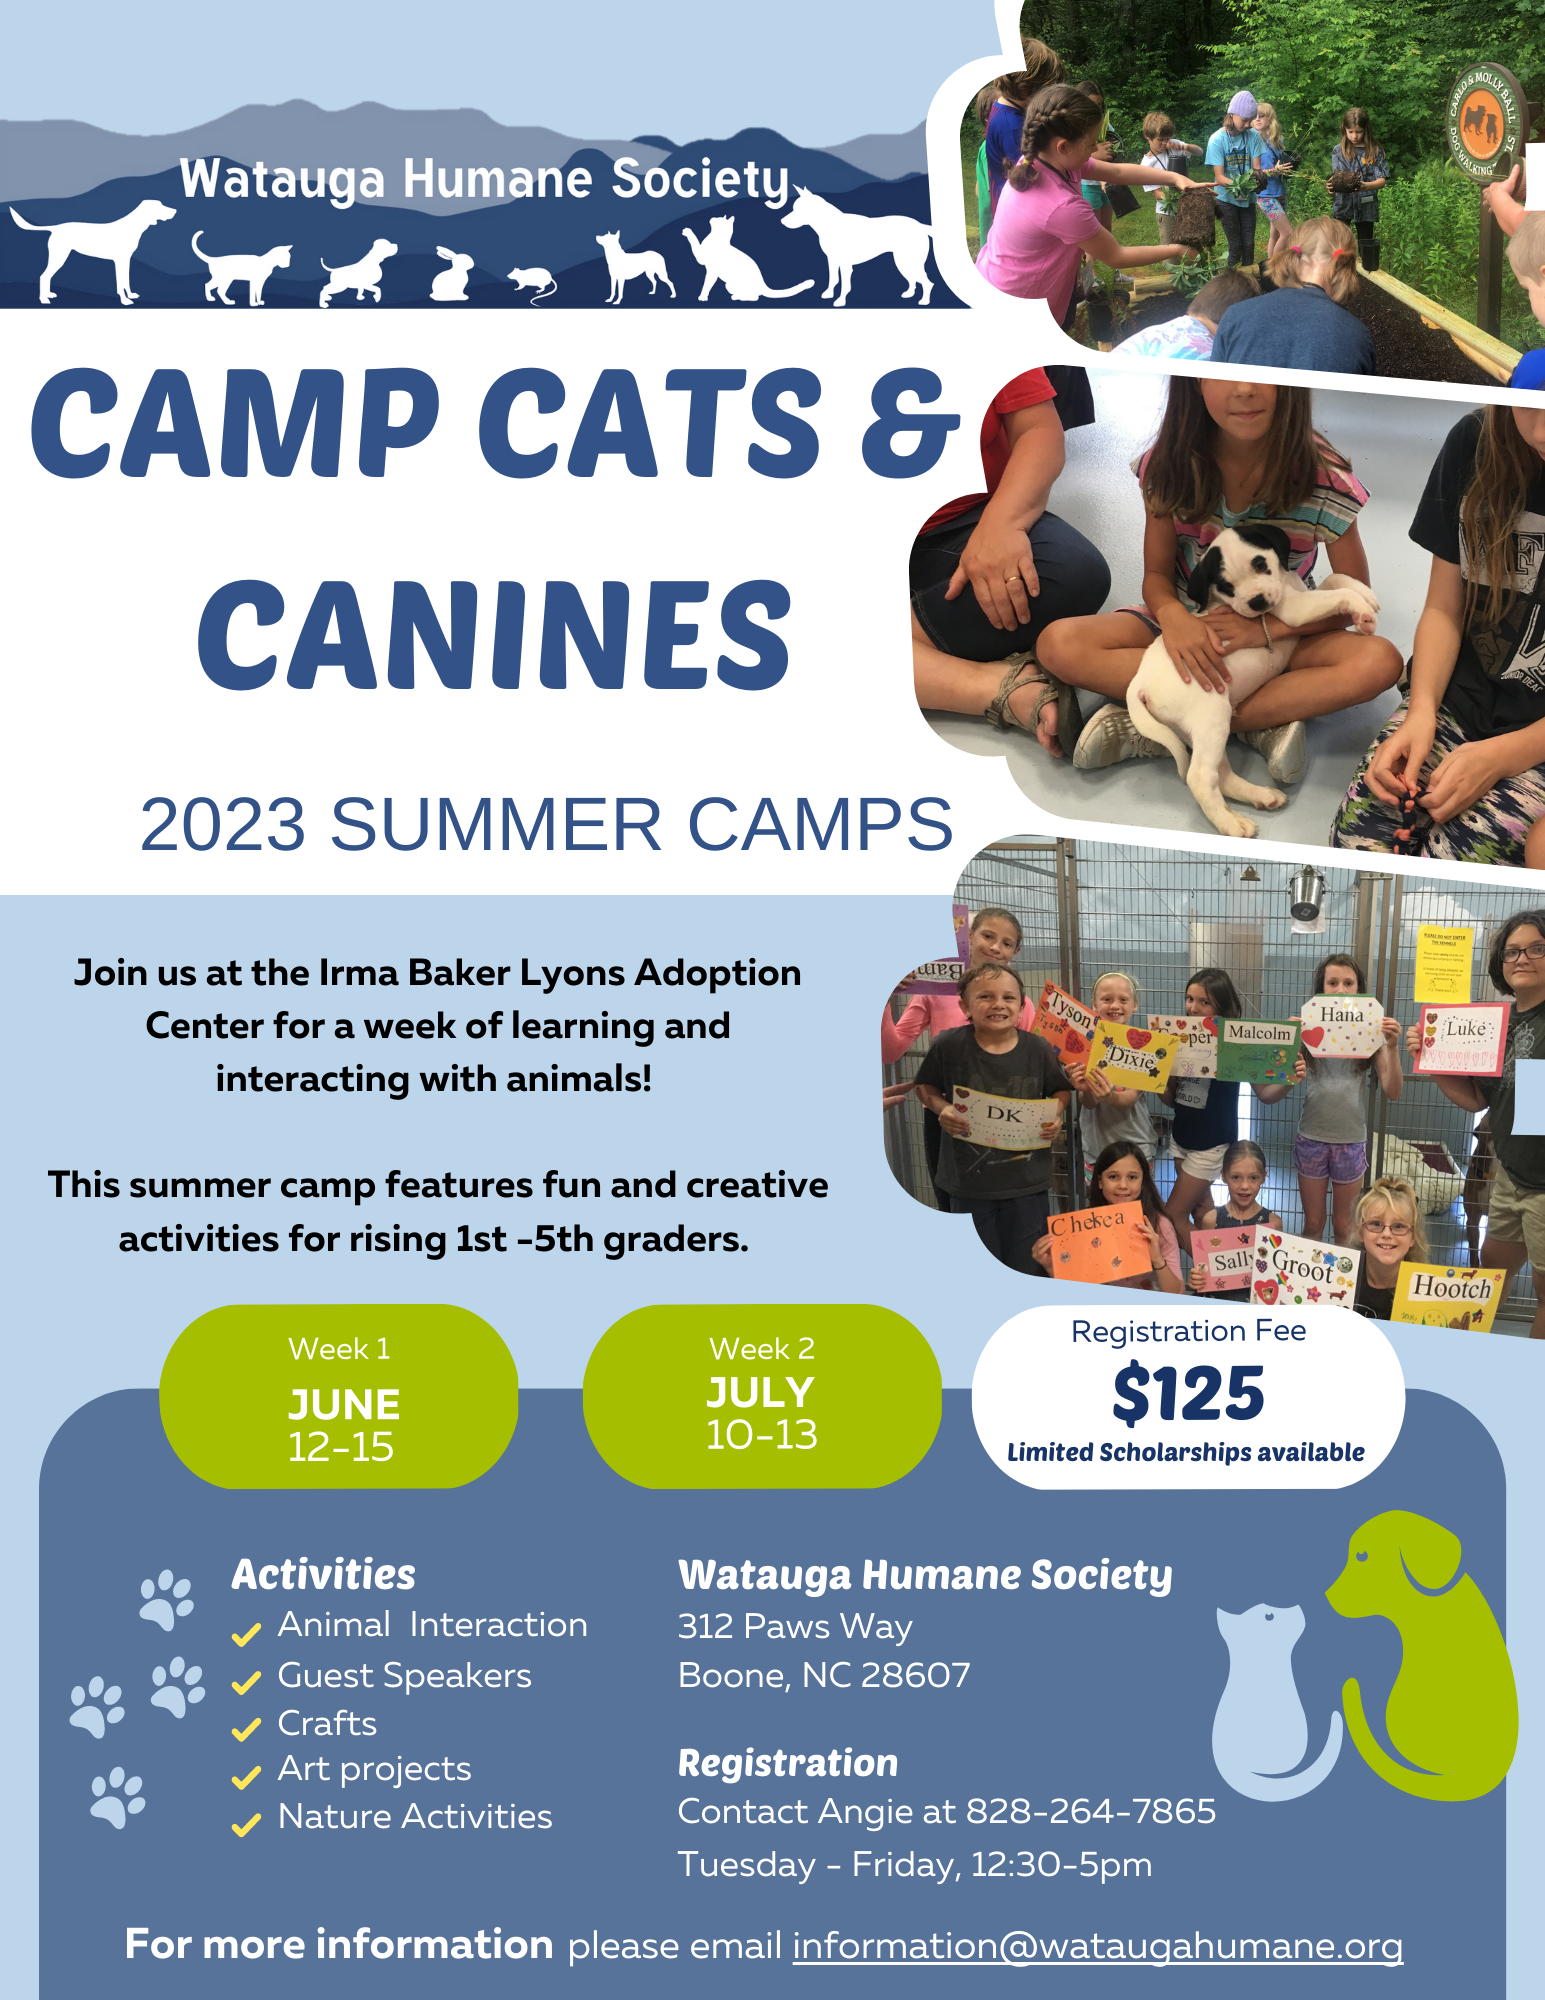 2023 Camp Cats & Canines